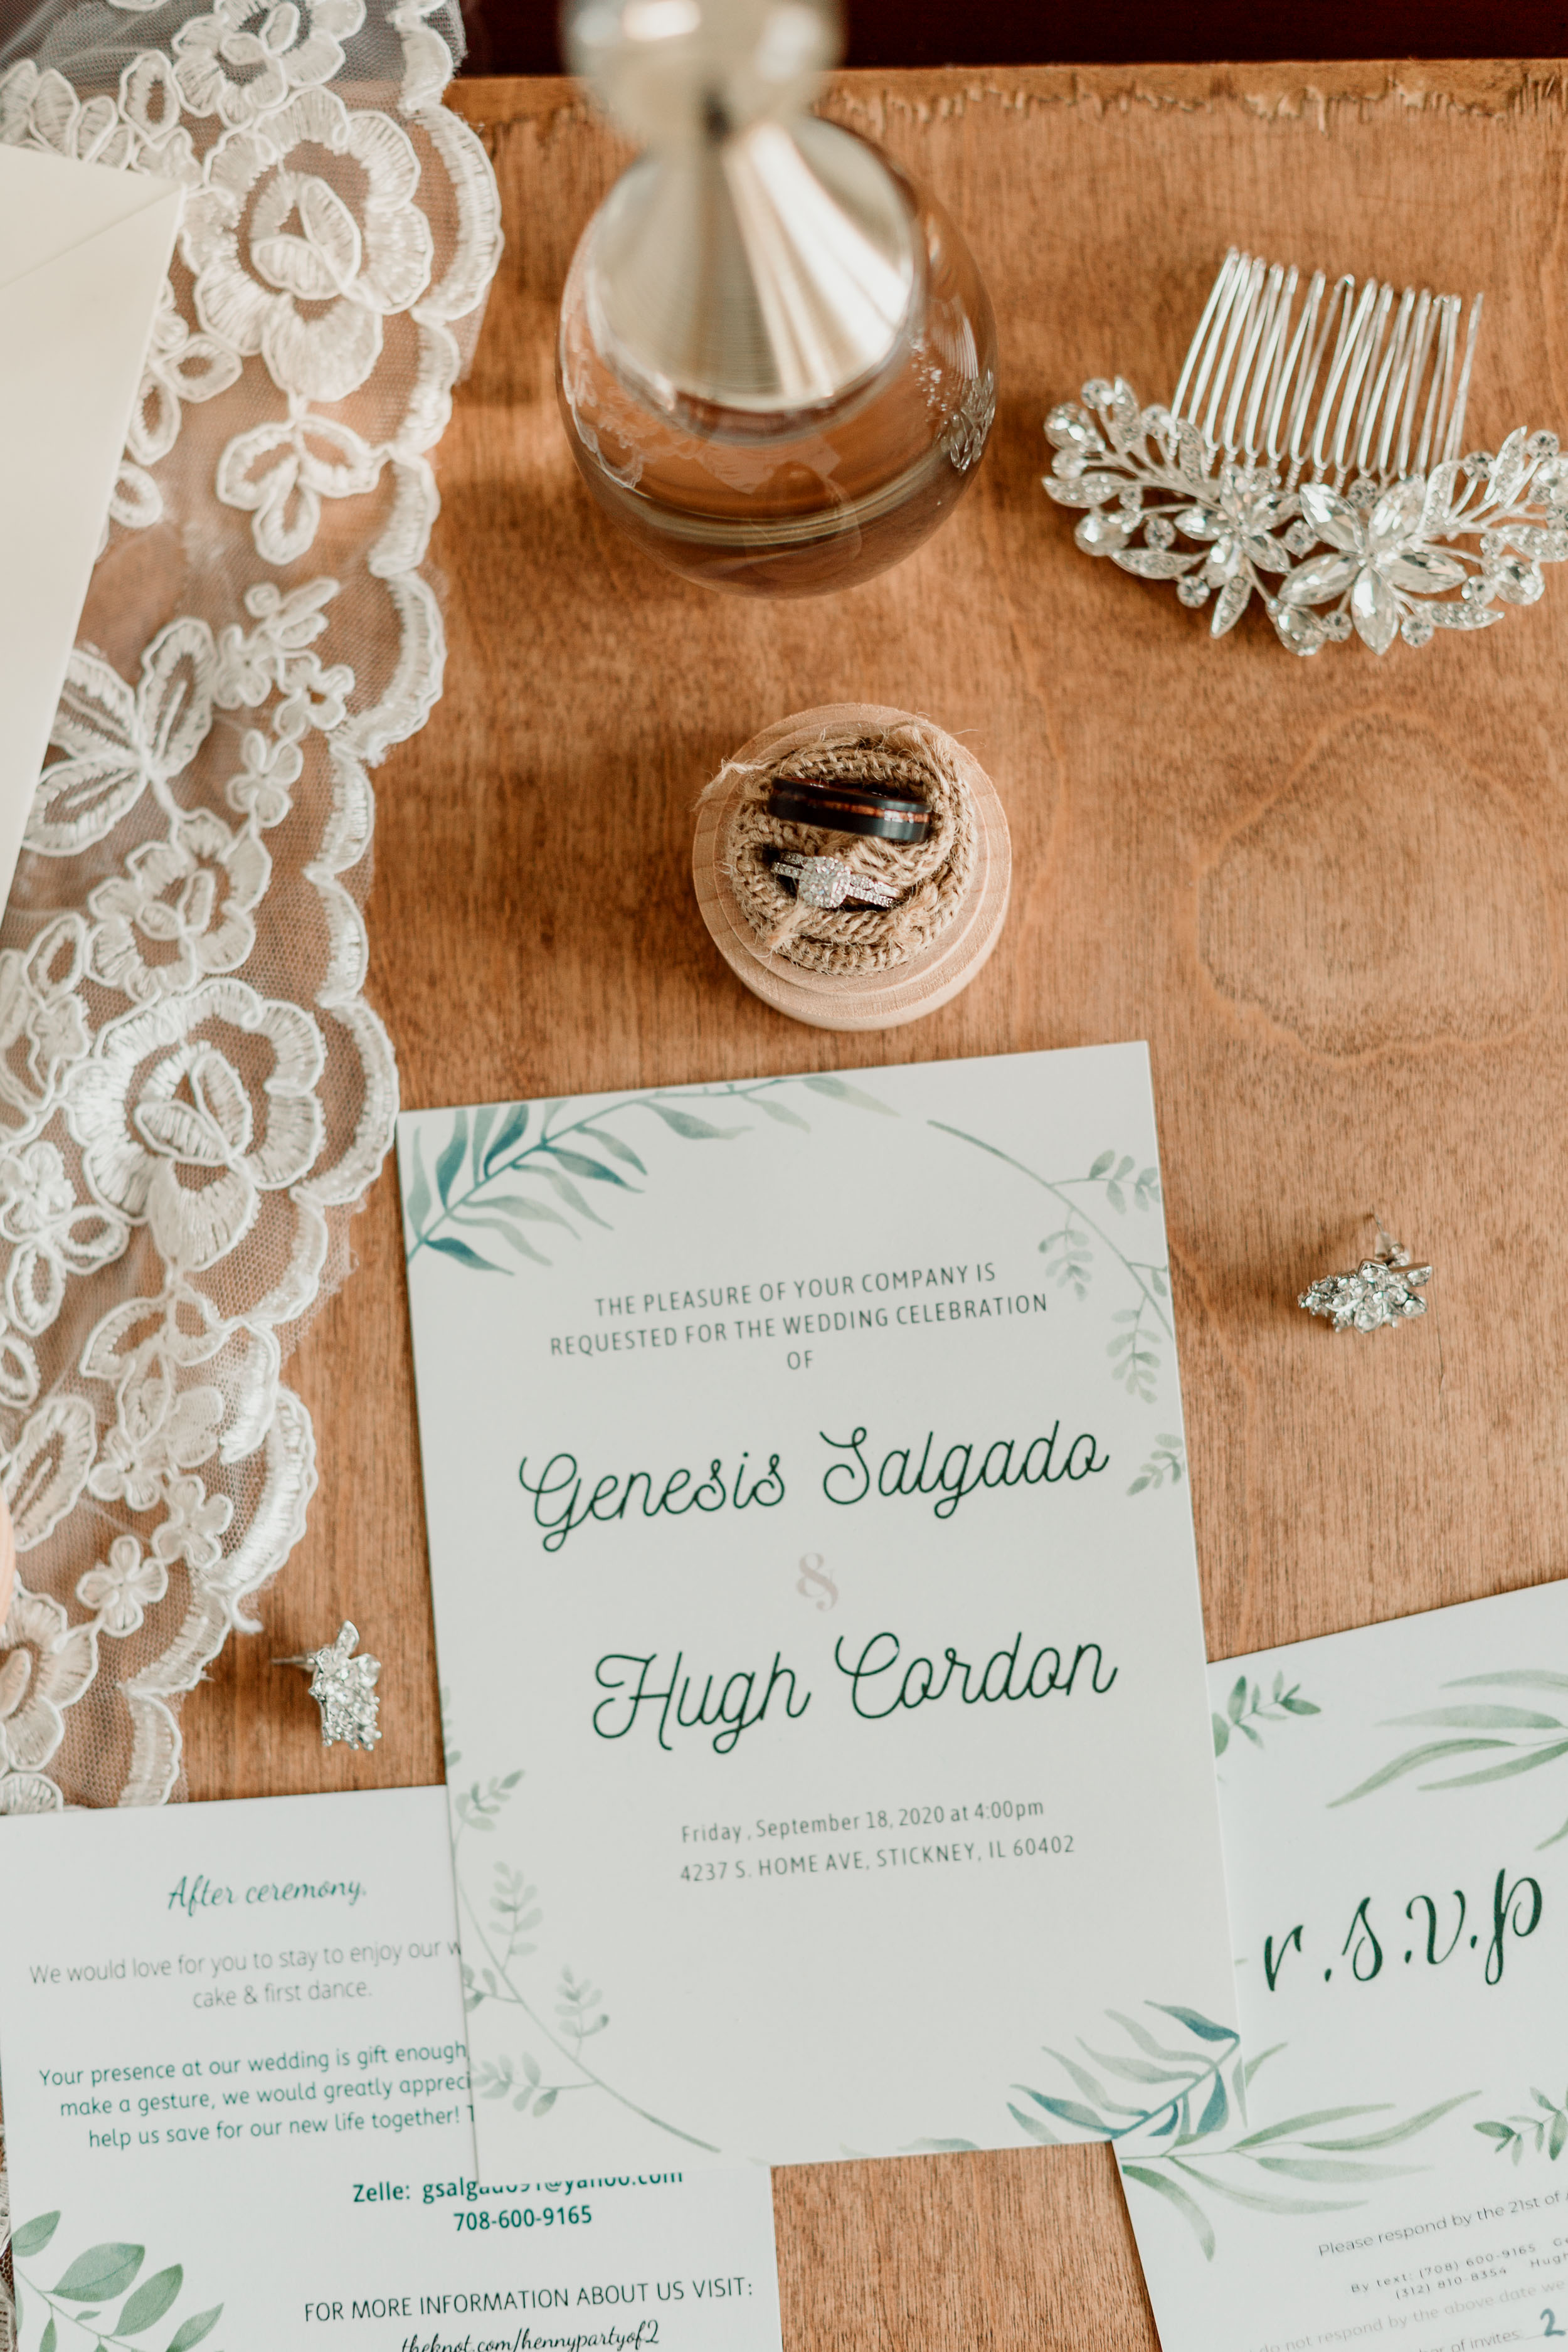 Detail photos for Backyard Chicago Wedding | Engagement Ring | Hair Pin | Wedding Invitation Suite | Emotional Chicago Wedding | Historic Downtown Riverside Wedding Photos | Chicago Wedding Photographer | Metra Station Wedding Photos | Small Weddings in Chicago | Intimate Elopements in Chicago